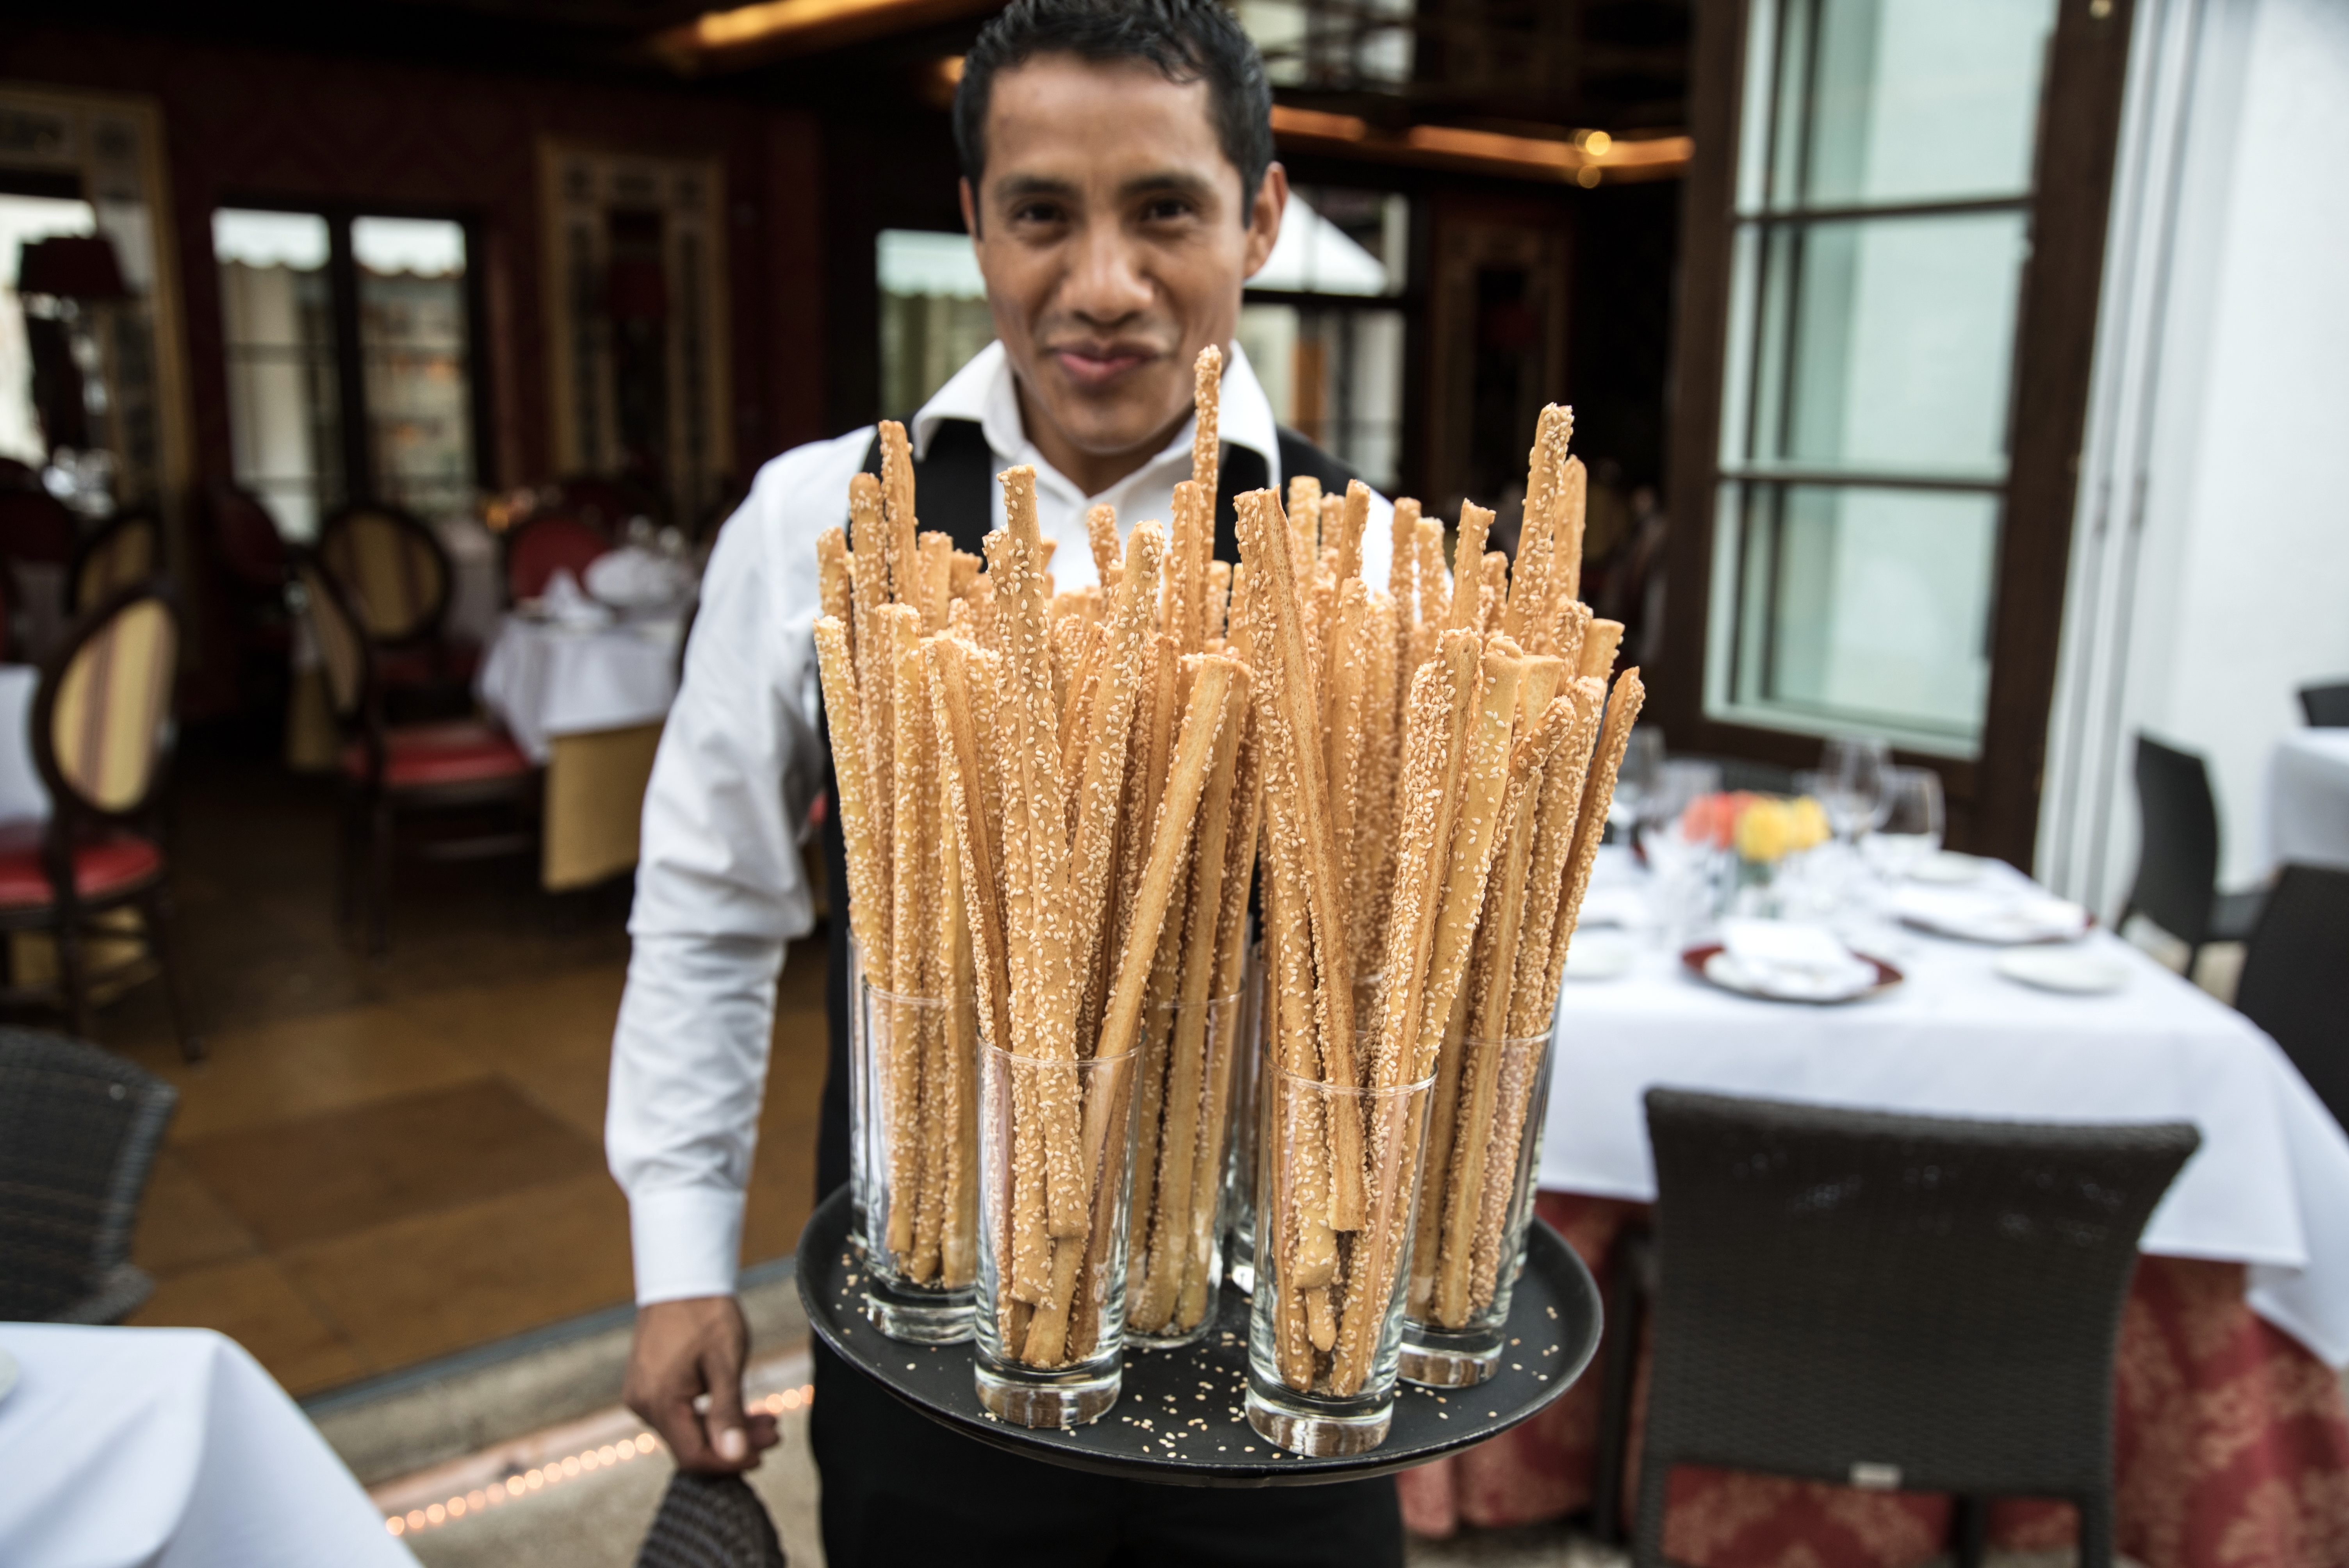 A waiter holds a tray full of grissini, Italian breadsticks. He’s looking directly at the camera. The courtyard of the restaurant is in the background and beyond the courtyard is the open doors of the inside of the restaurant.